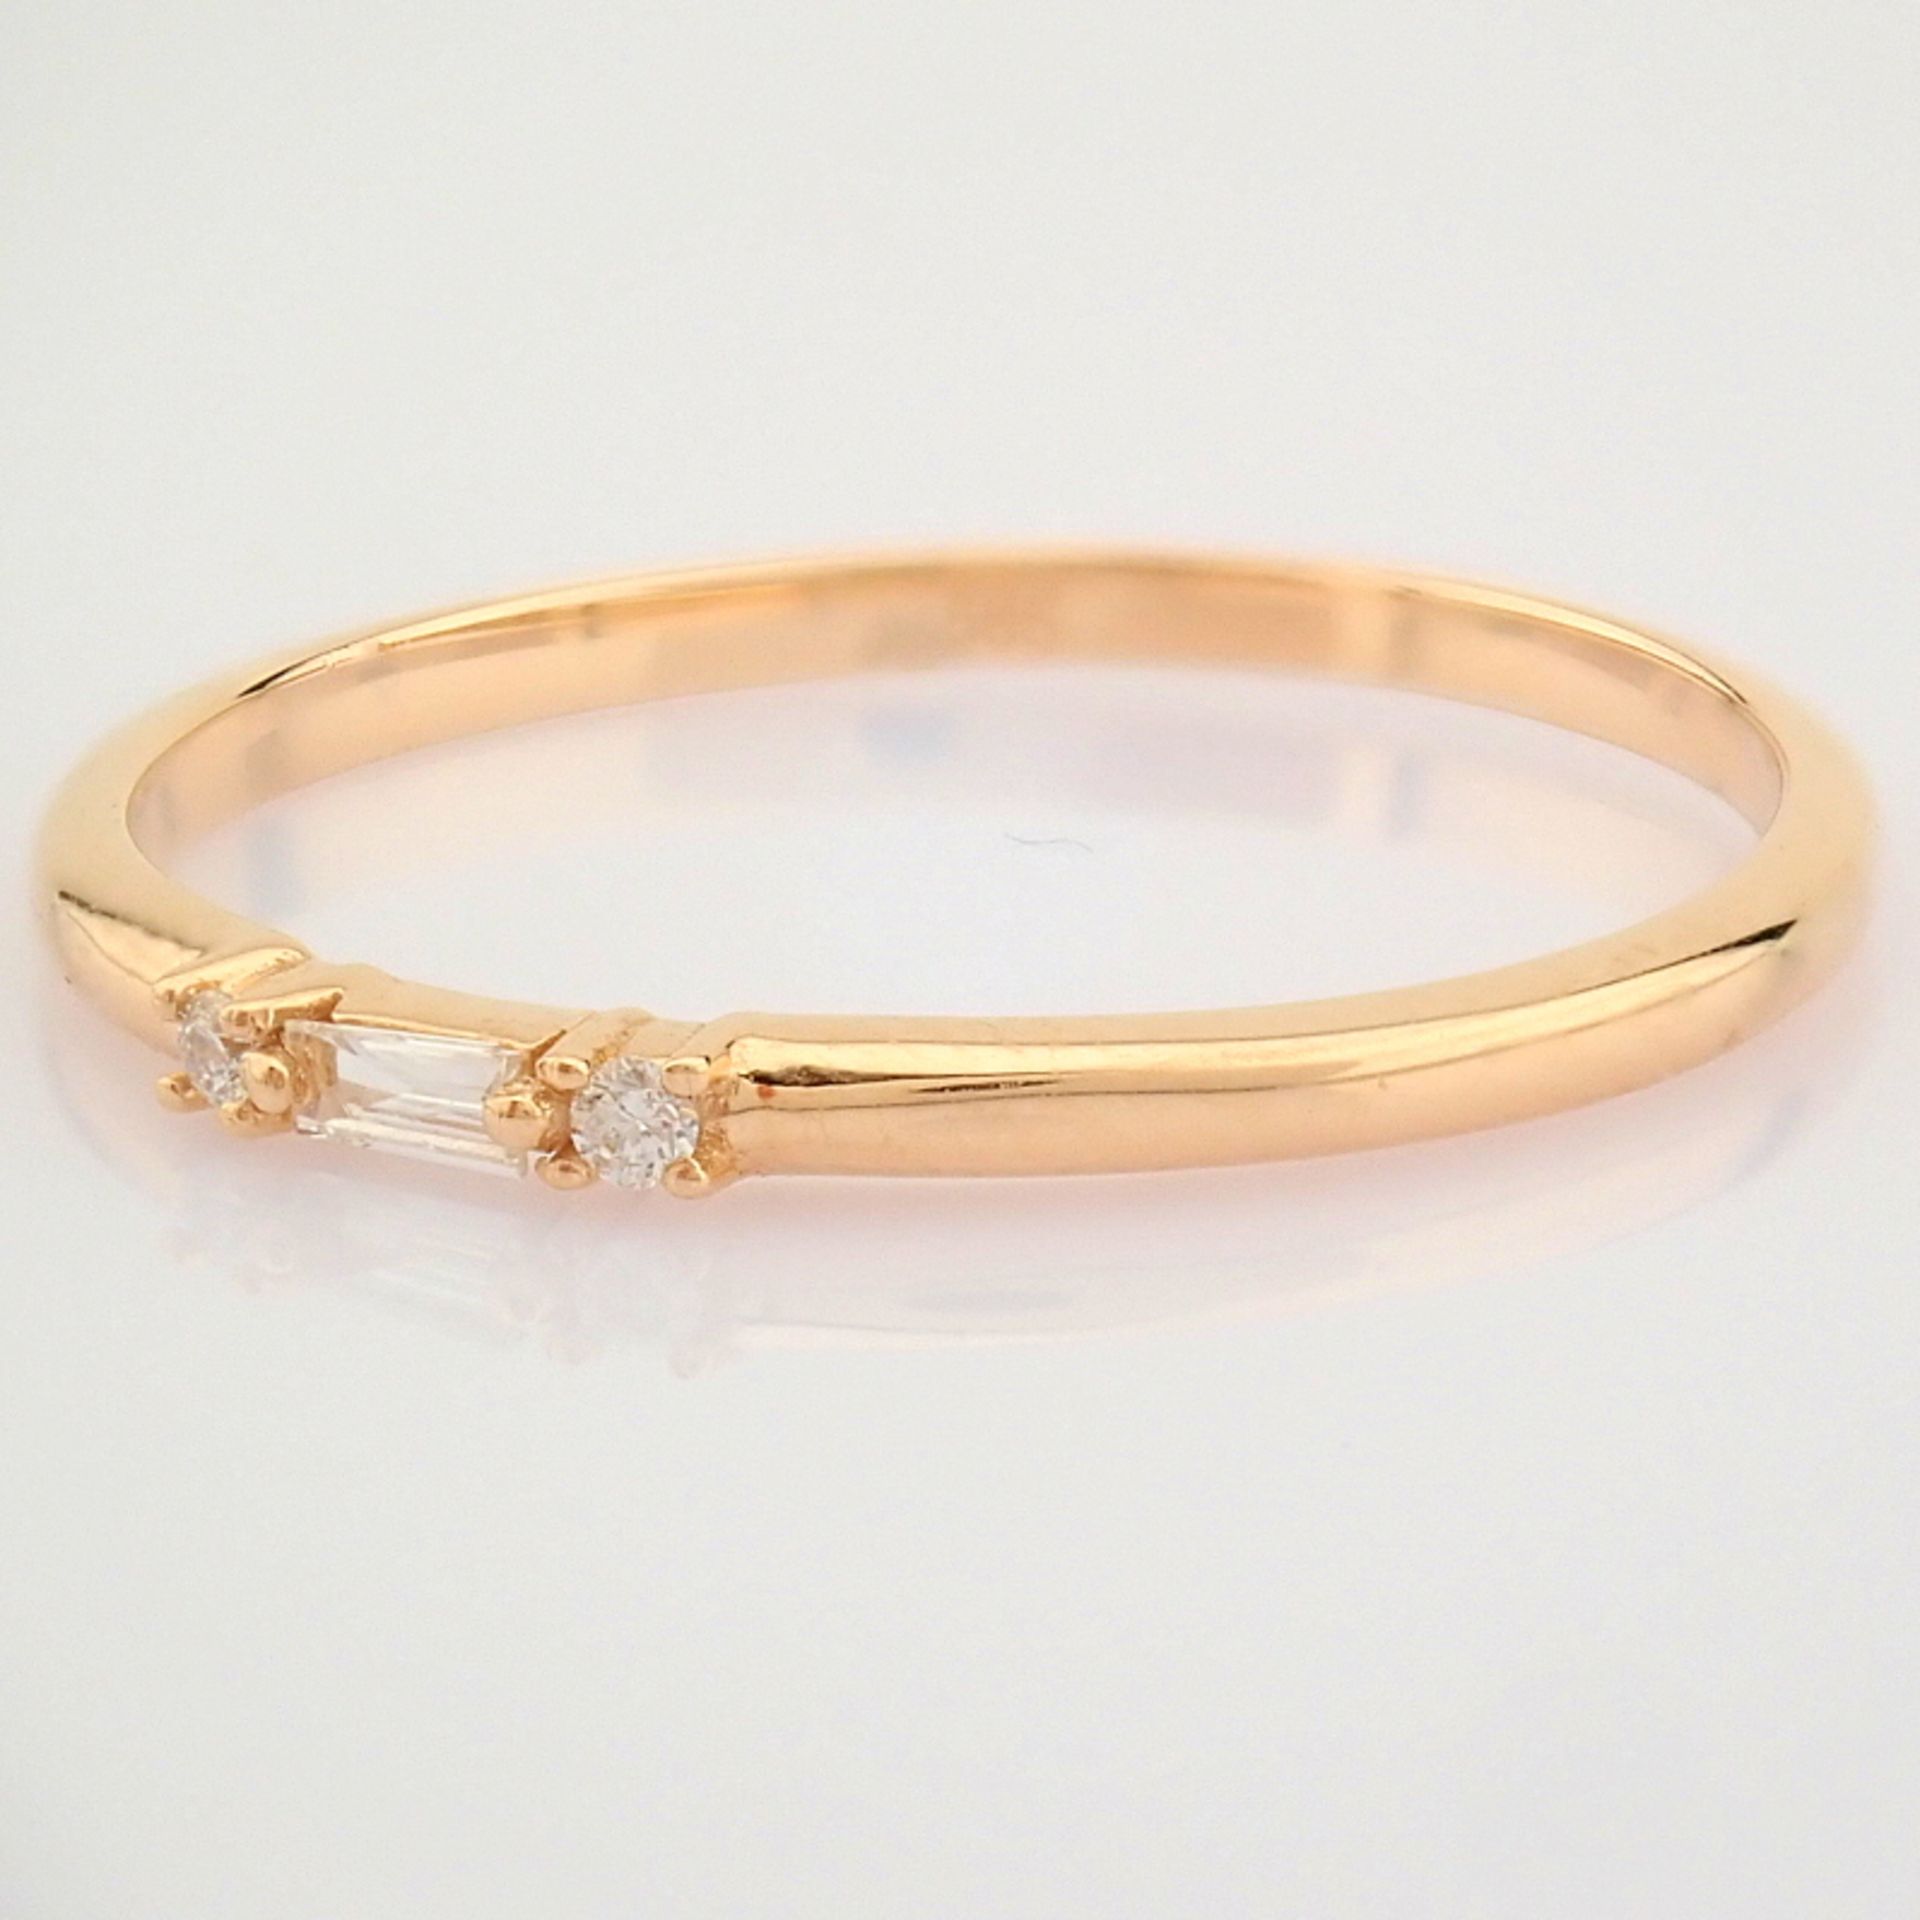 Certificated 14K Rose/Pink Gold Baguette Diamond & Diamond Ring (Total 0.04 ct Stone) - Image 5 of 12